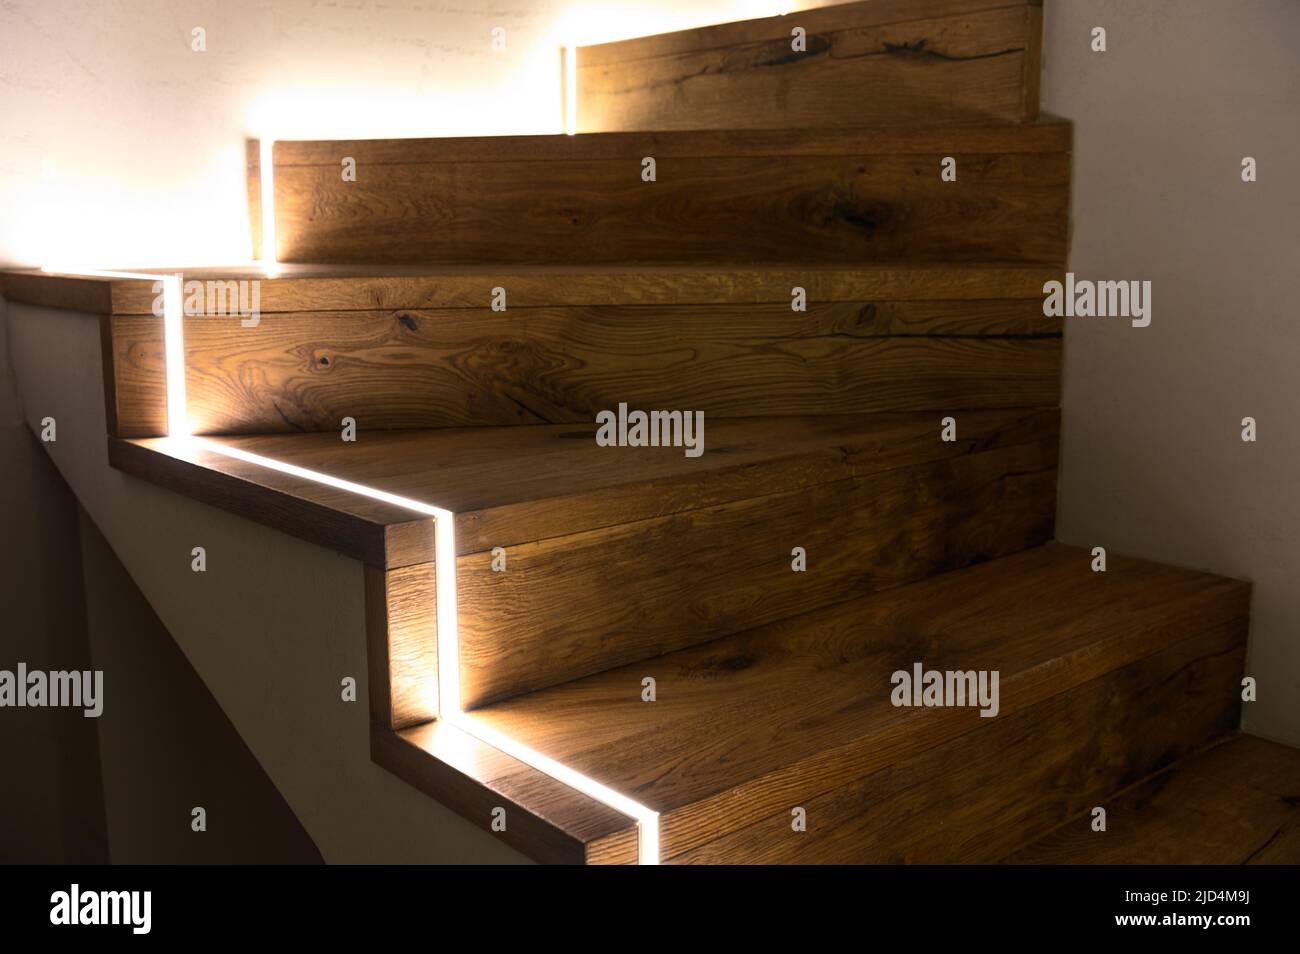 Close-up of Staircase at Home Illuminated with LED Strip Lights. Stairway Lighting Design on Wooden Residential Stairs. Stock Photo